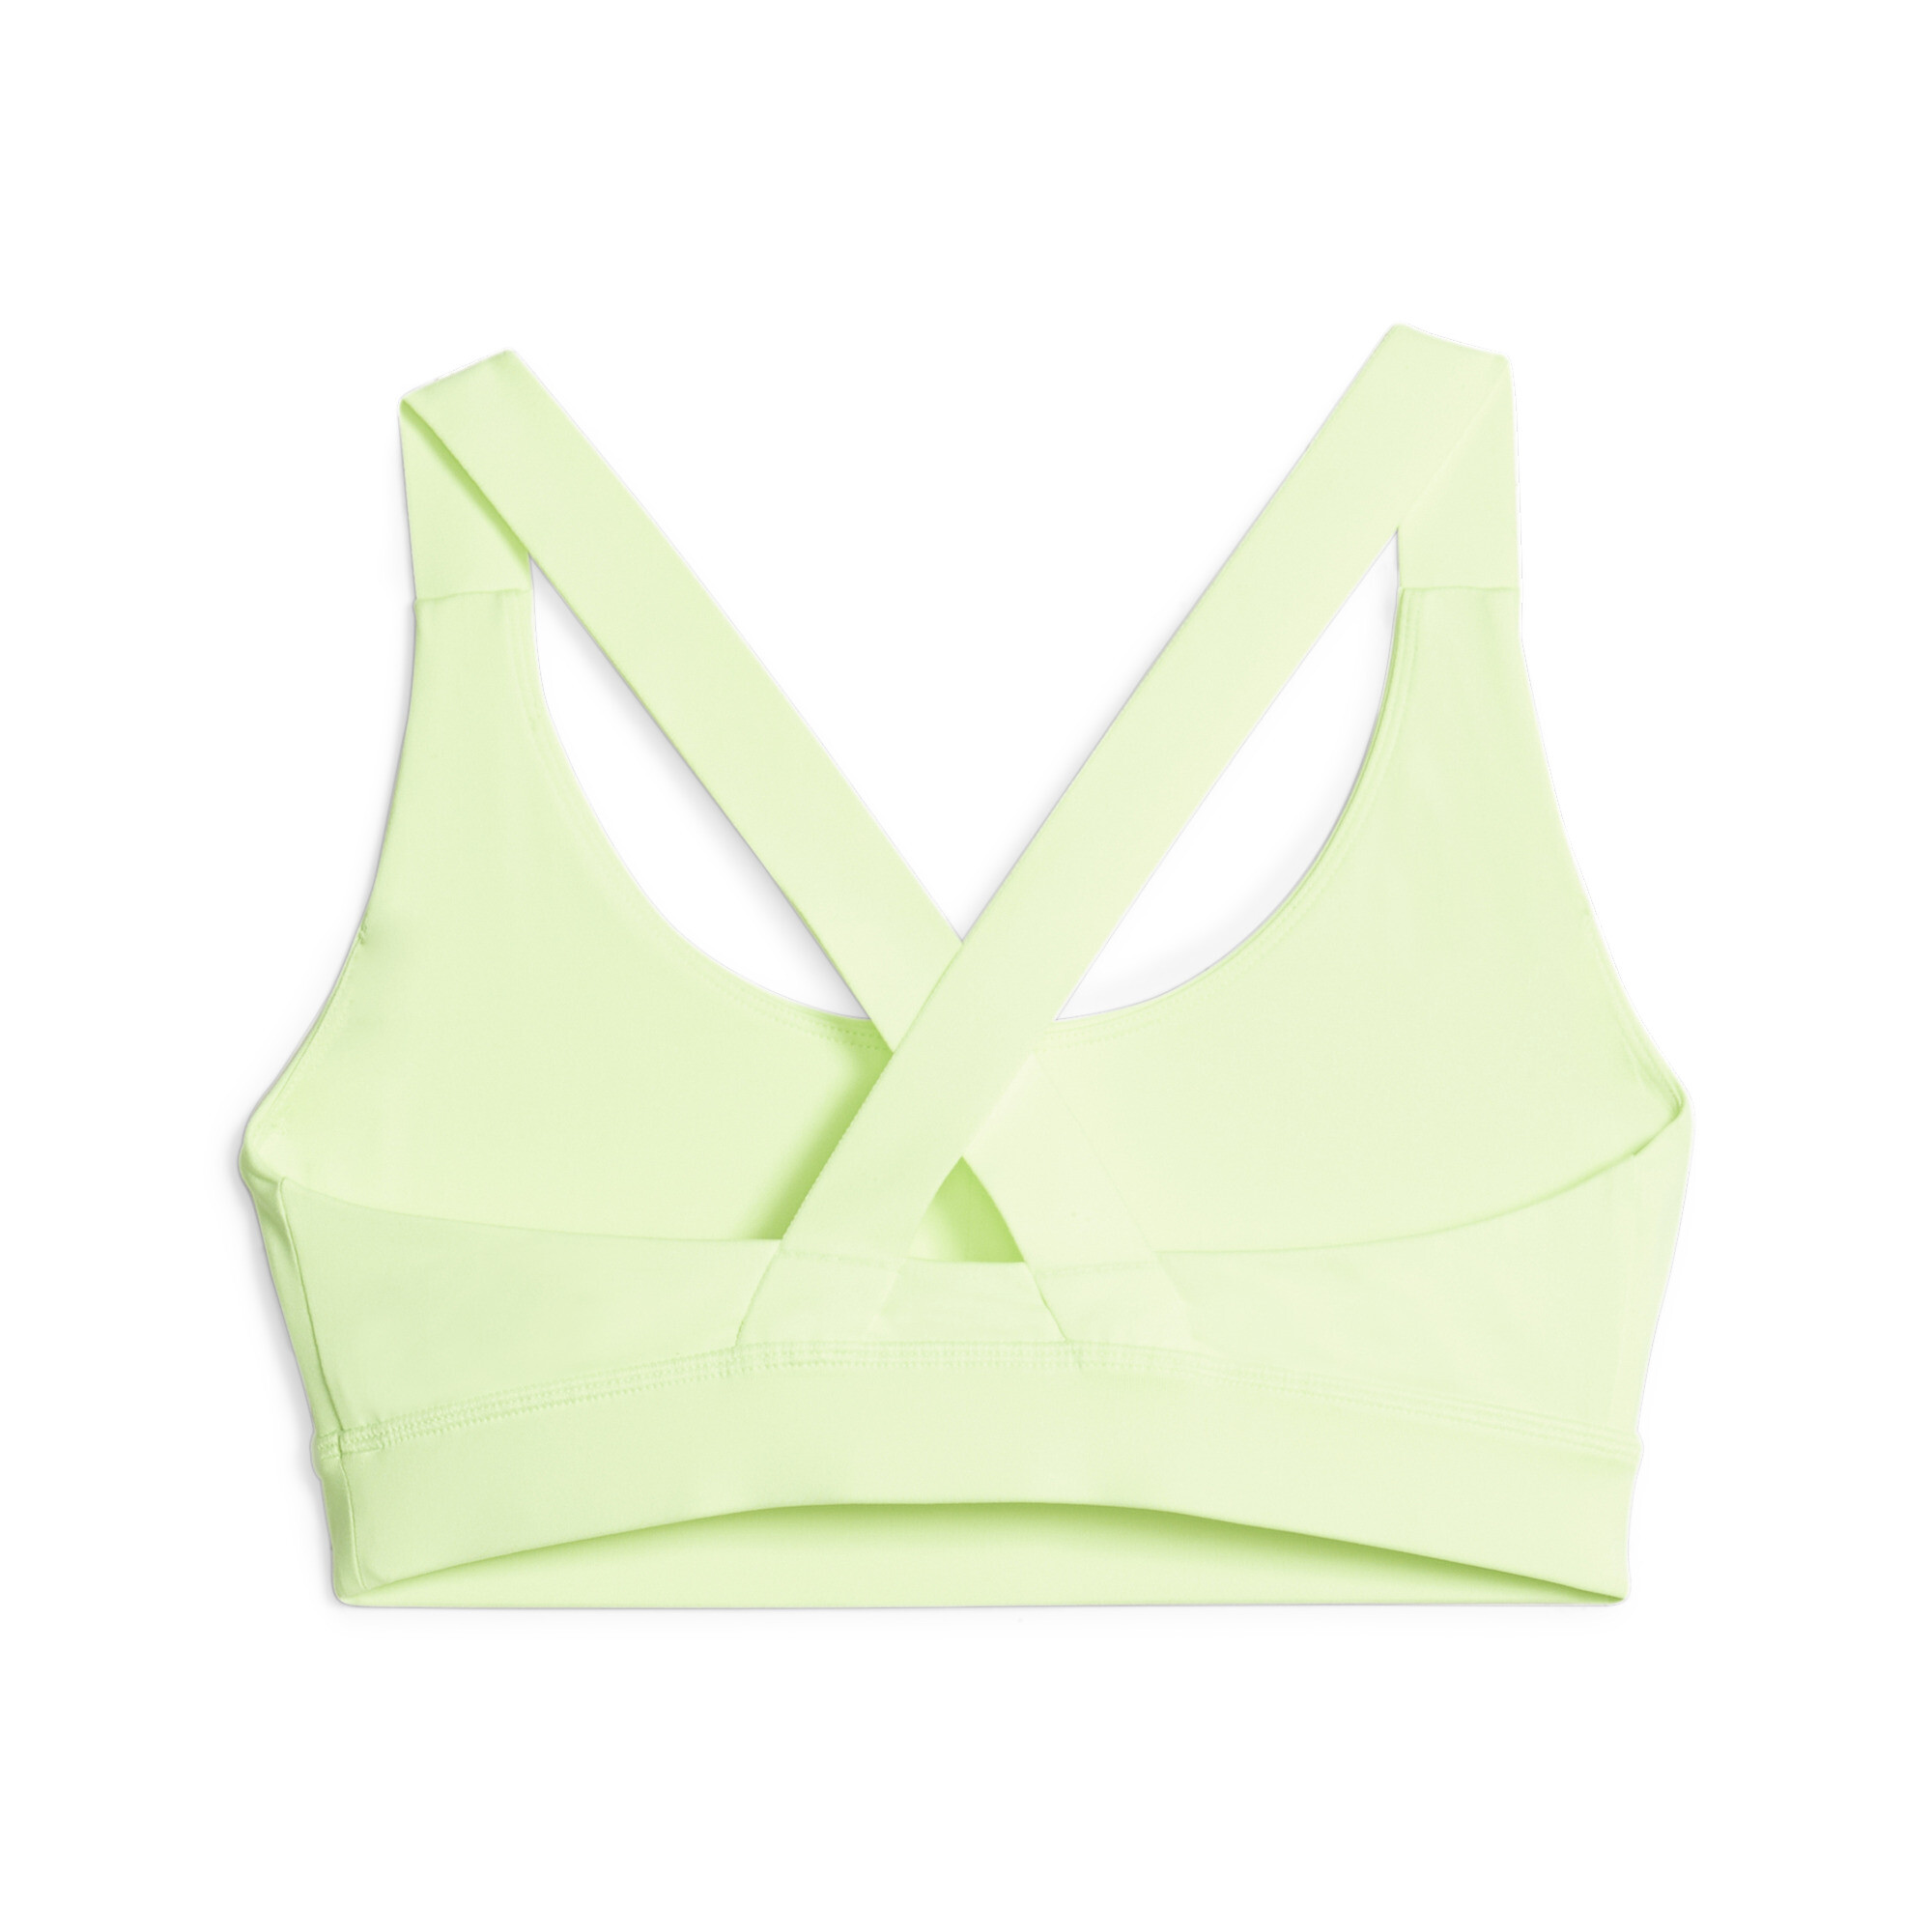 Women's PUMA Fit Mid Impact Training Bra In Green, Size Large